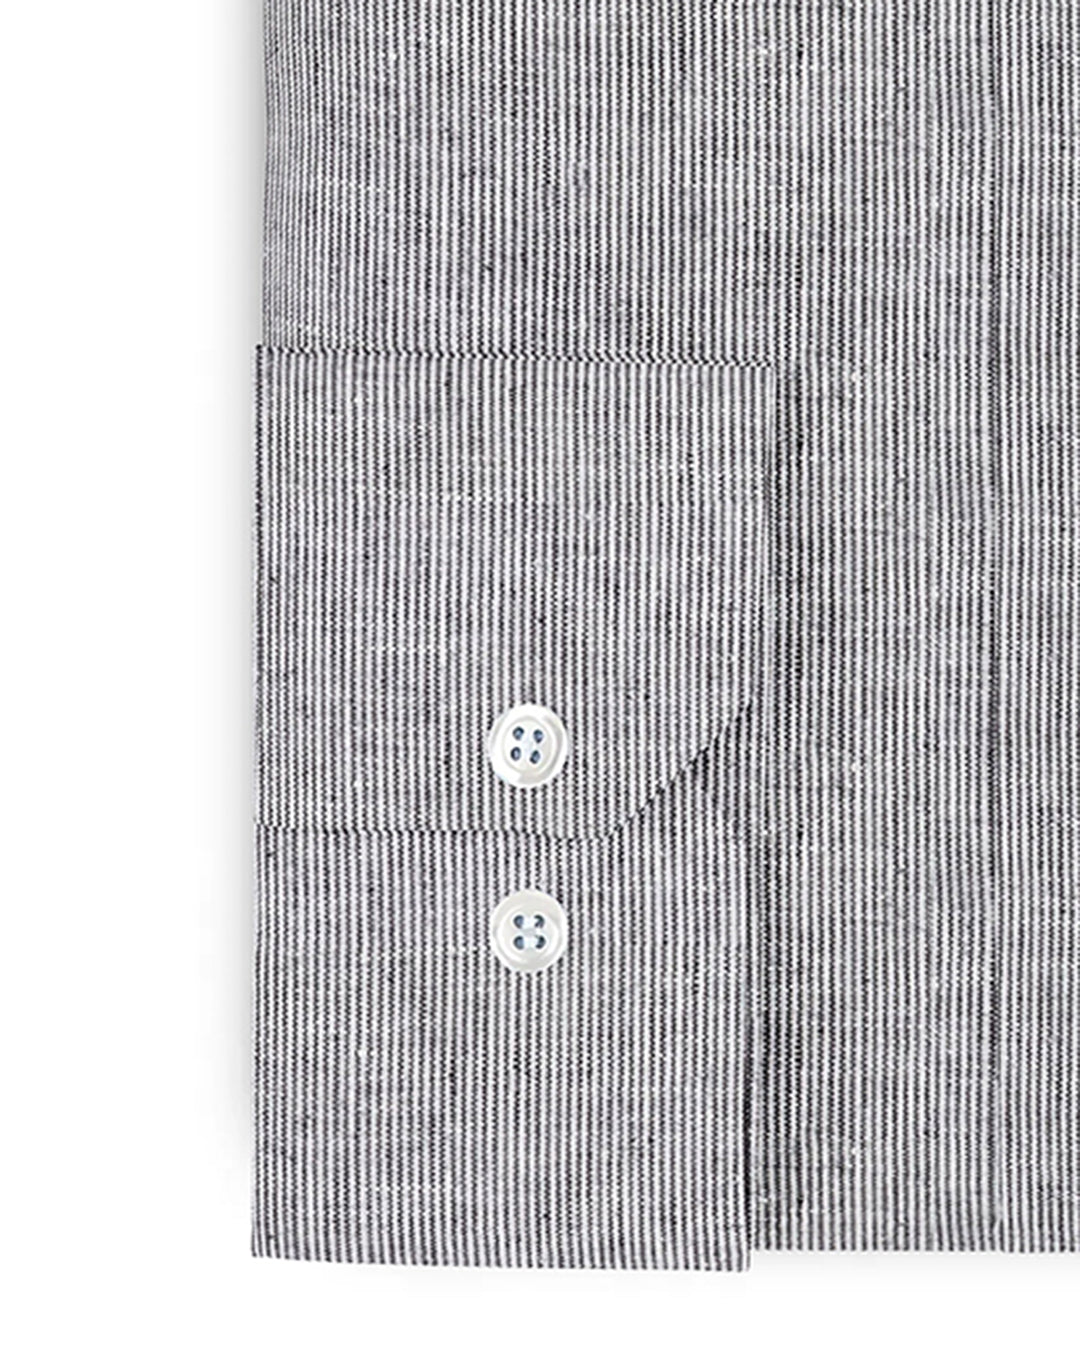 Cuff of the custom linen shirt for men in black and white thin stripes by Luxire Clothing